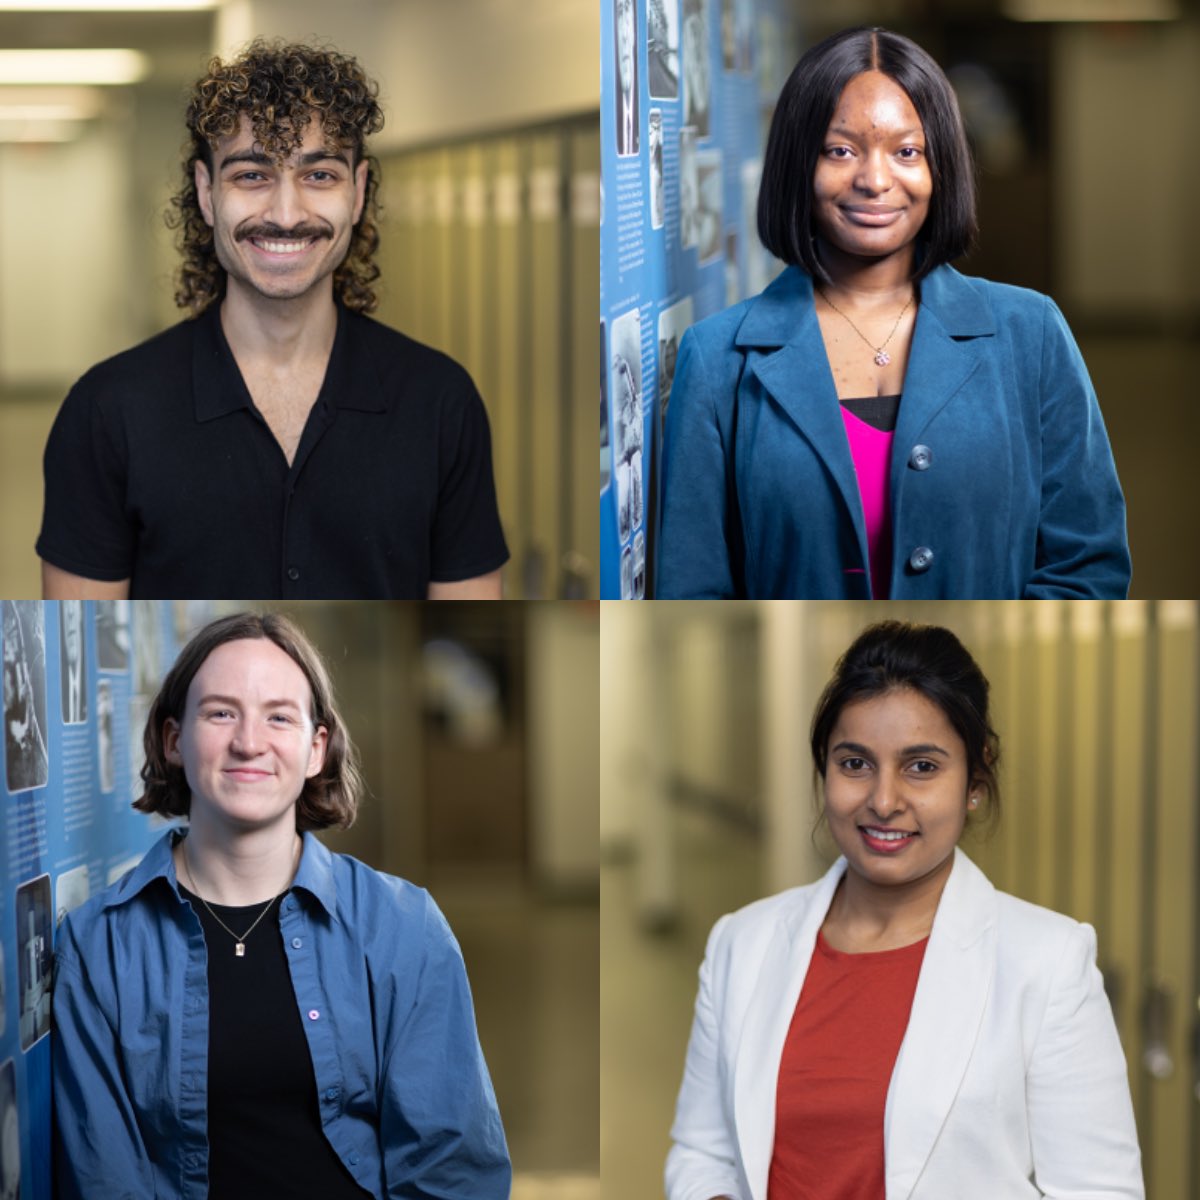 After three competitive heats, meet the twelve 3MT finalists! They will each have three short minutes to explain their research. Mark your calendars for the thrilling 3MT Final Competition on April 10. Get all the details by visiting umanitoba.ca/graduate-studi… #UManitoba